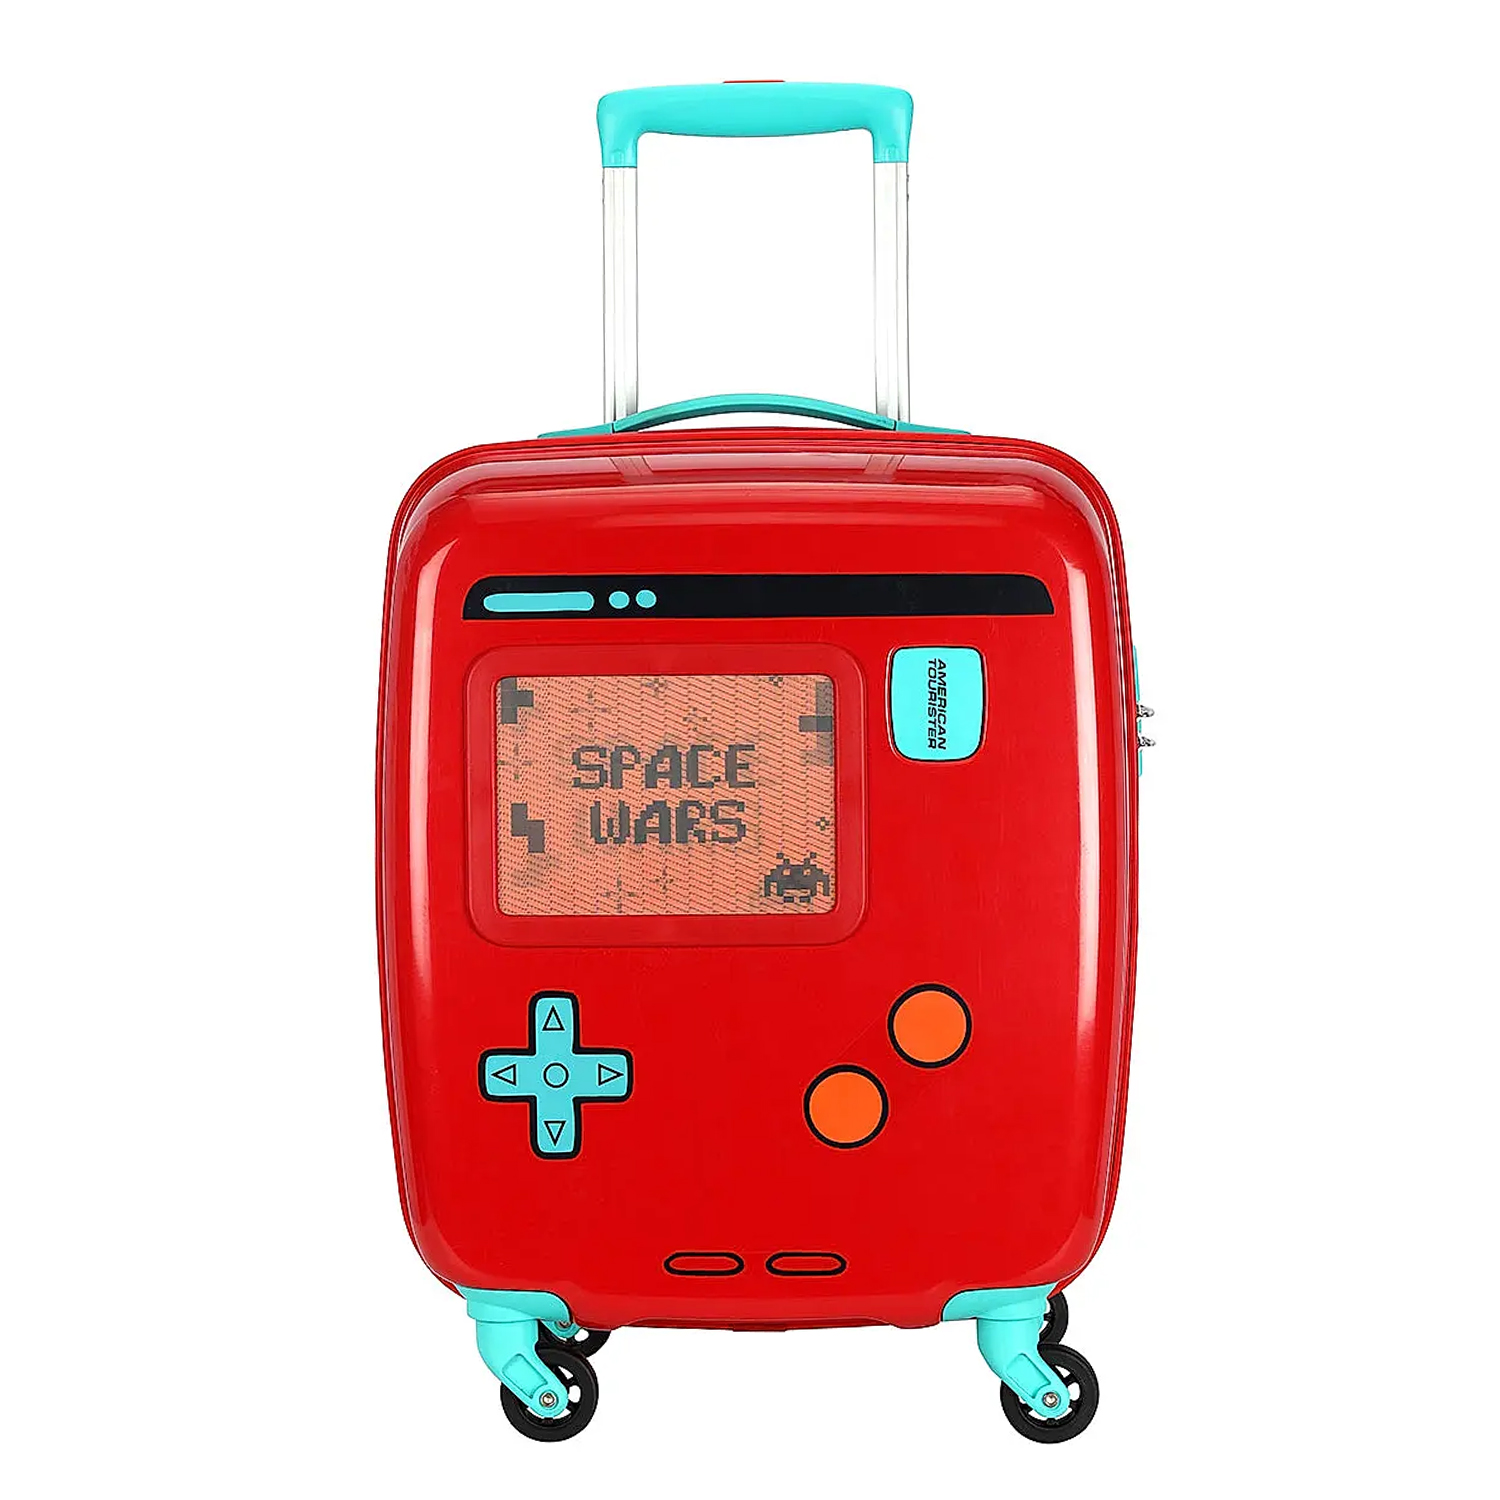 RoshanBags_AMERICAN TOURISTER SWAG ON KIDS LUGGAGE STROLLY GAMER RED